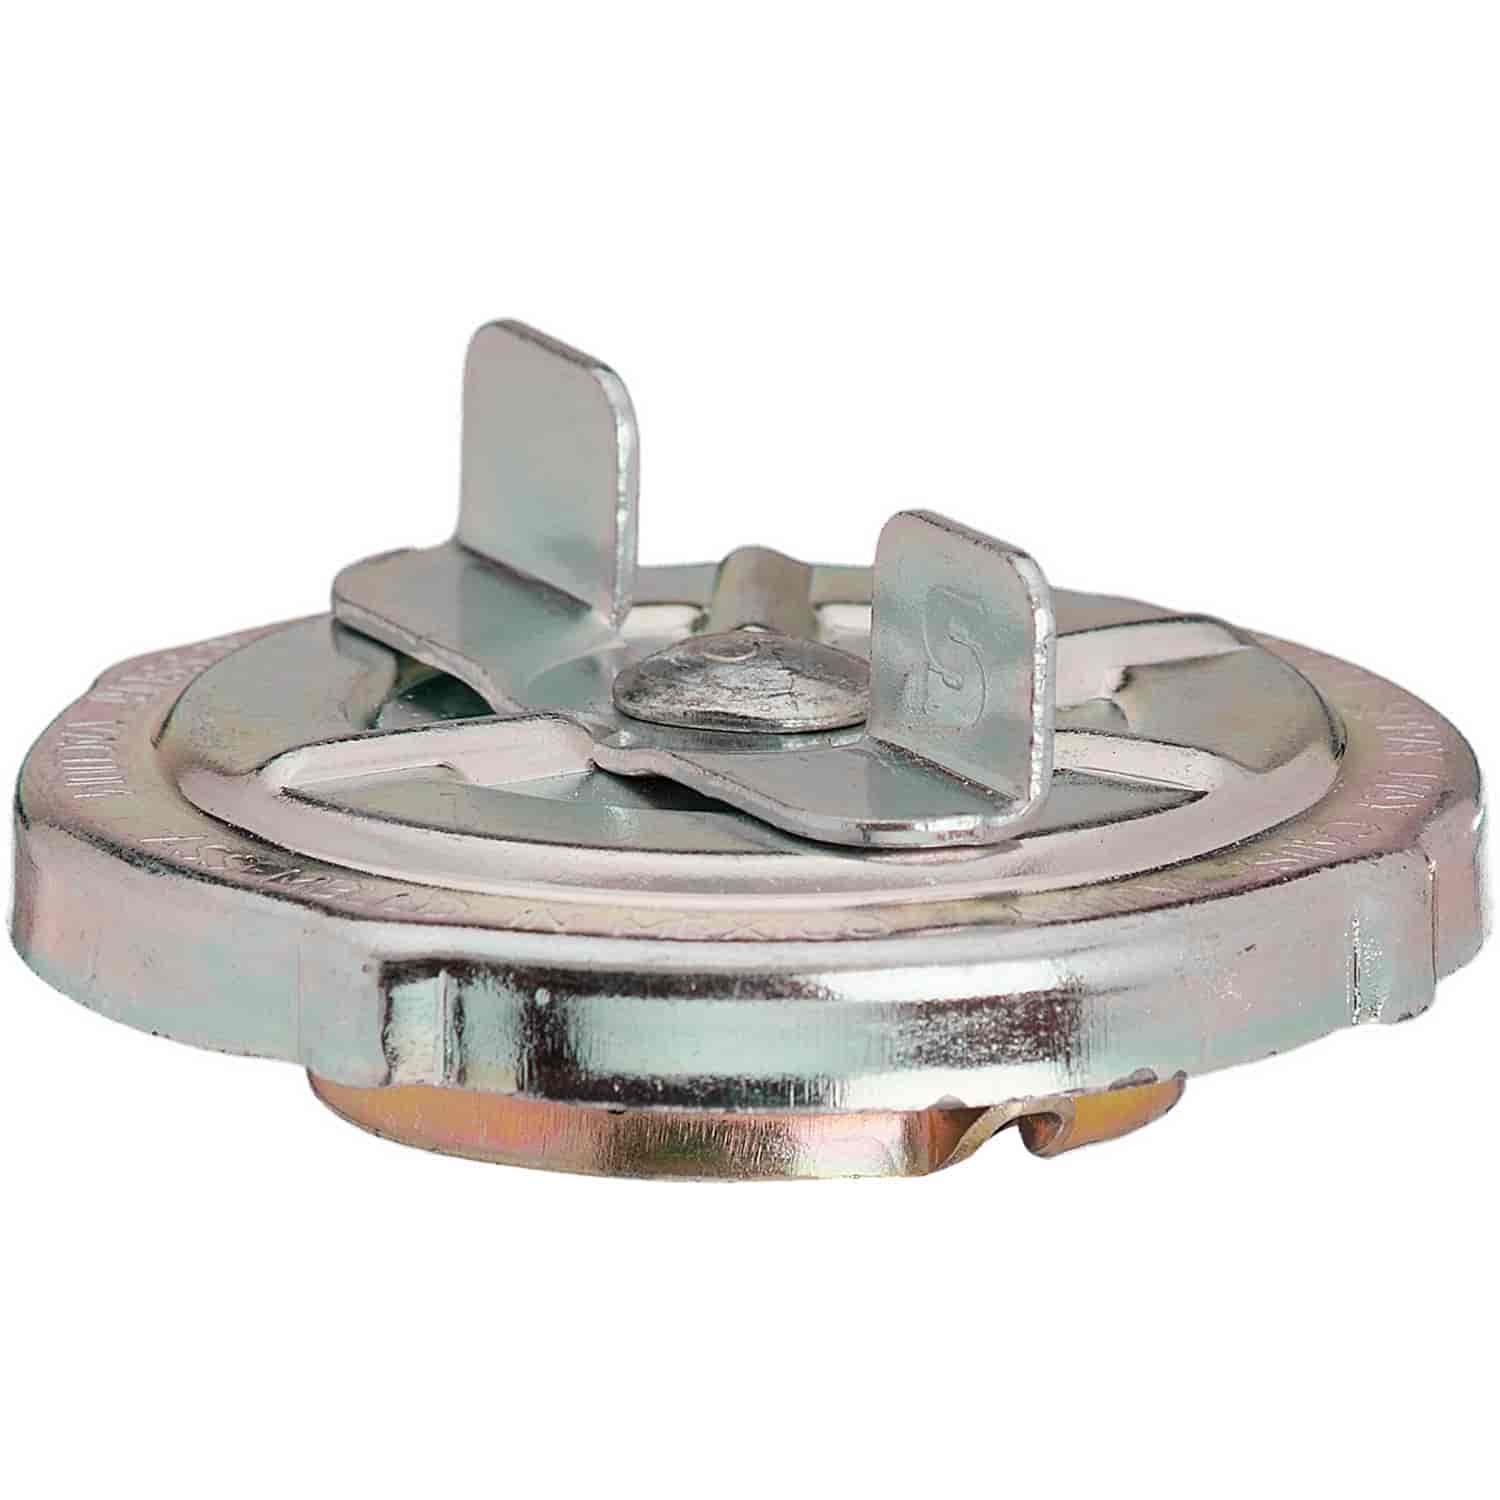 31630 Fuel Cap for Select 1980-1988 Ford Models [74100350, 072053415735]